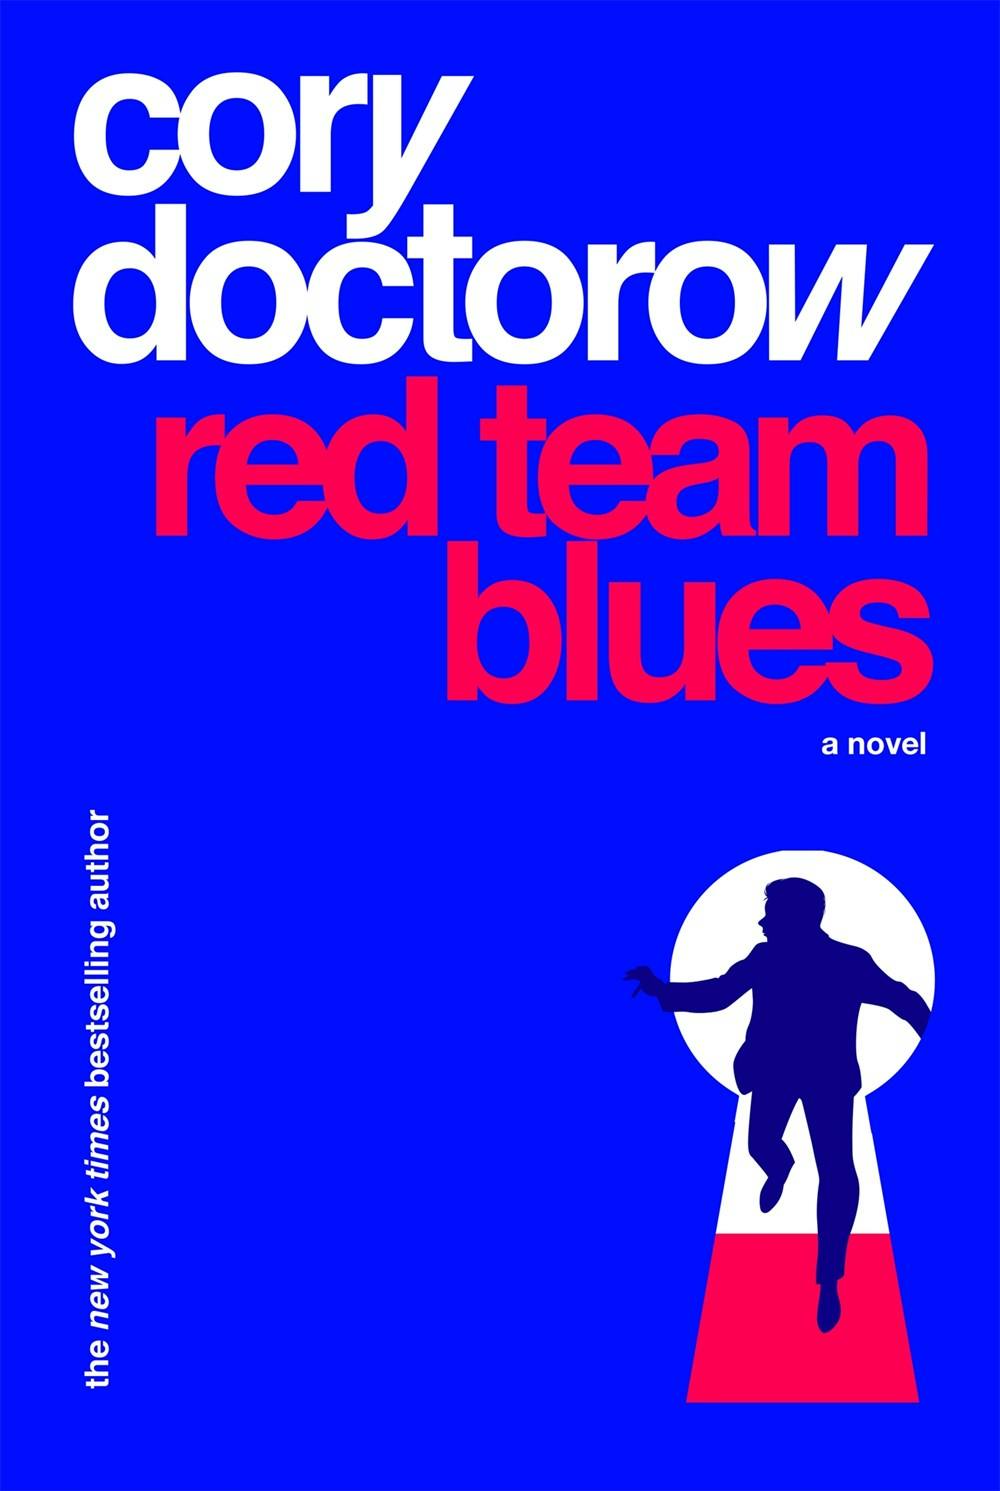 Red Team Blues, by Cory Doctorow